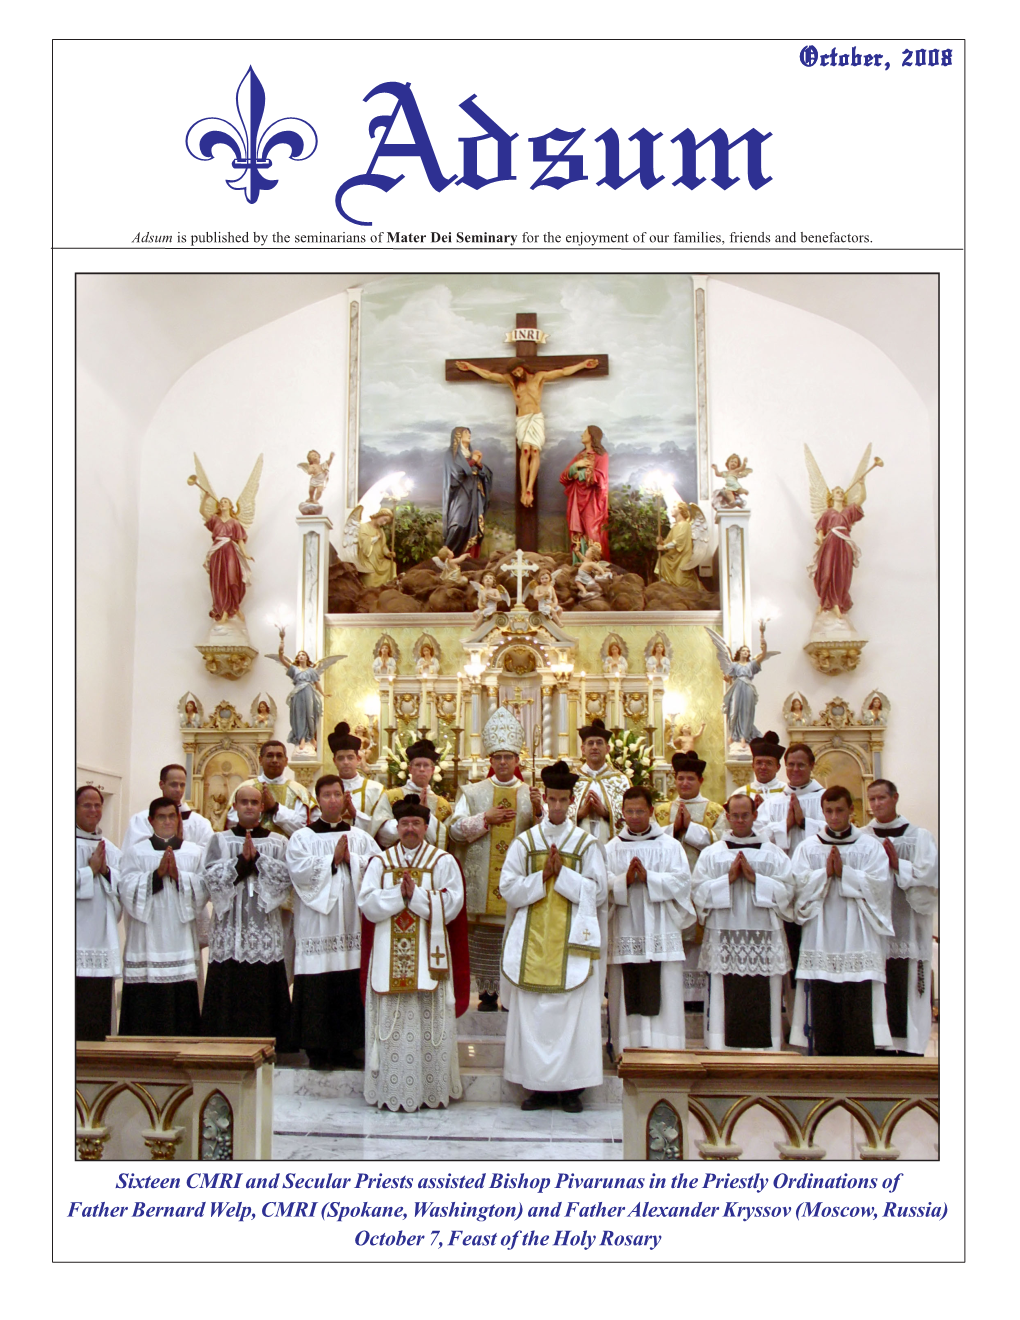 Adsum Adsum Is Published by the Seminarians of Mater Dei Seminary for the Enjoyment of Our Families, Friends and Benefactors